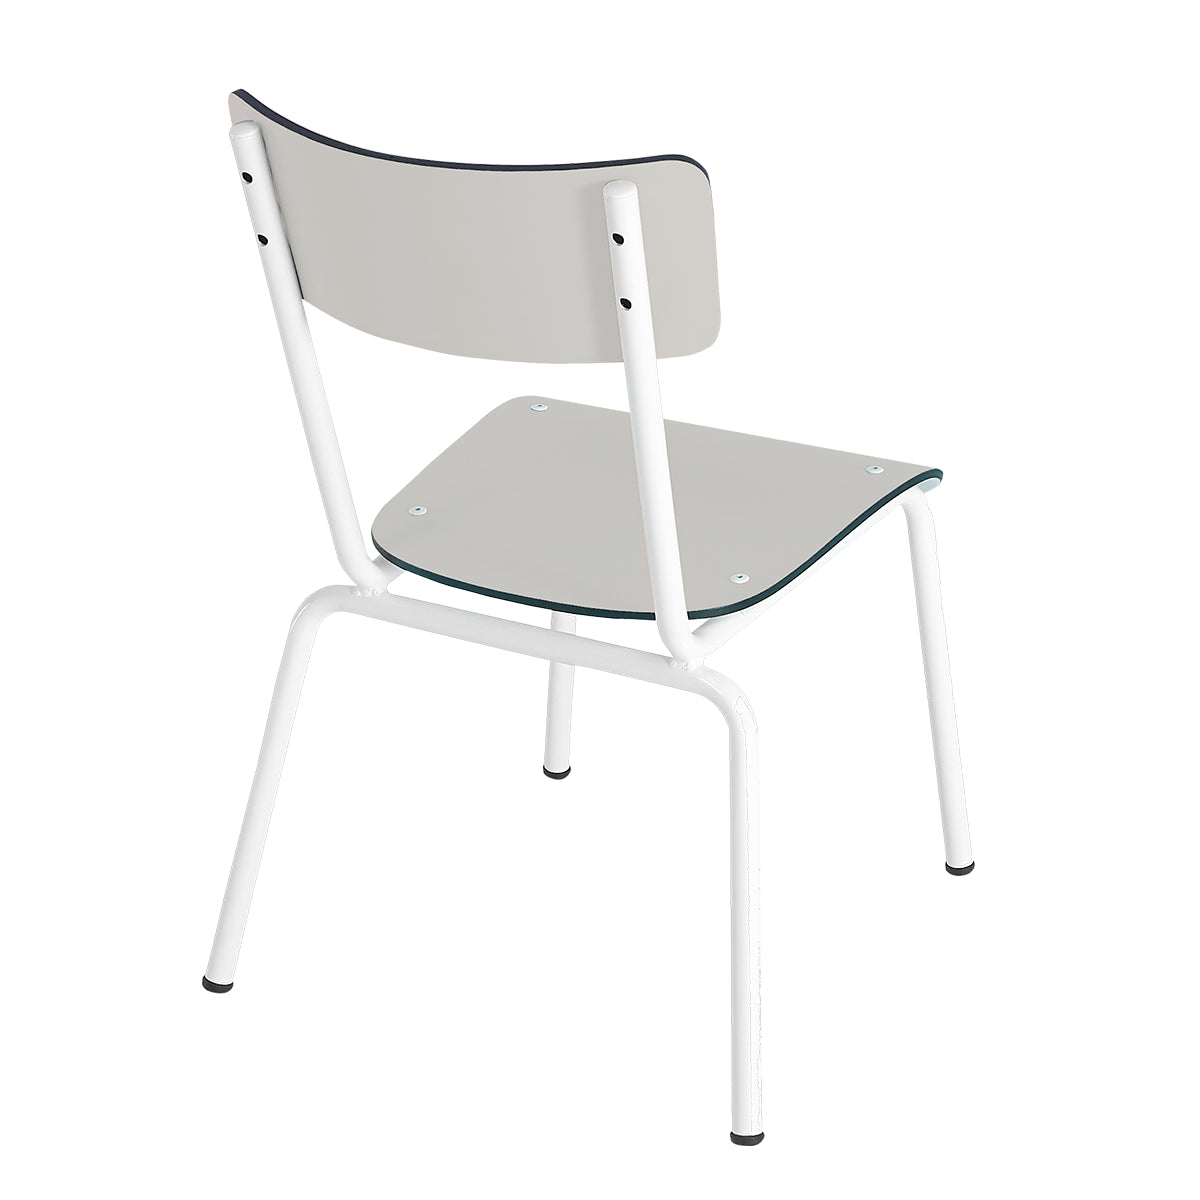 Les Gambettes Colette Elementary Chair Light Grey